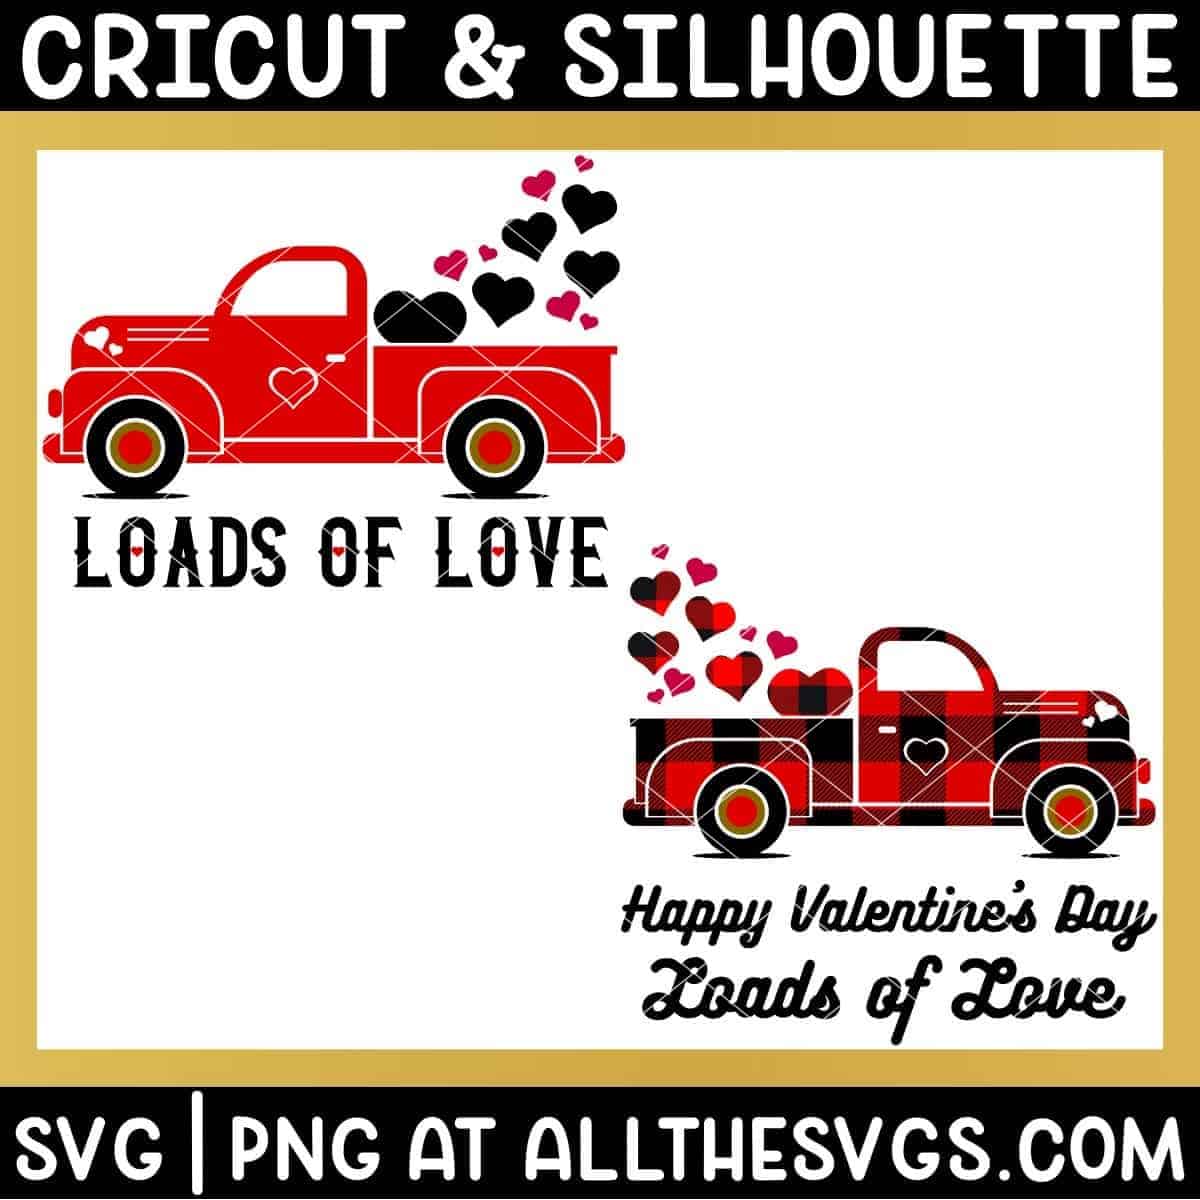 free valentine red vintage truck and buffalo check with hearts floating from trunk bed and loads of love phrase at bottom.